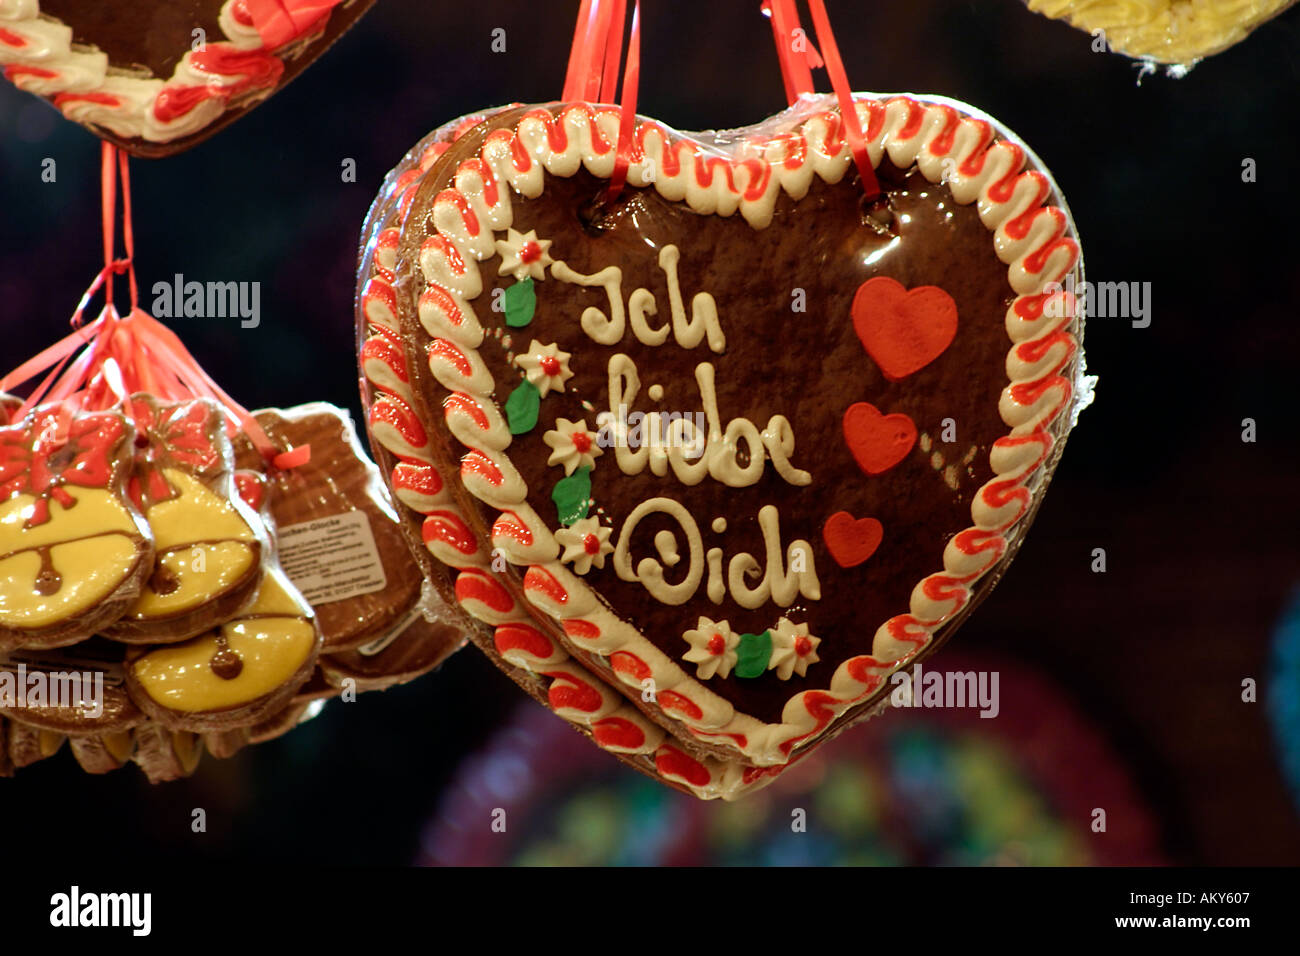 Ich Libe Dich I Love You Lebkuchen Gingerbread Hearts on Christmas market stall Cologne Germany Stock Photo